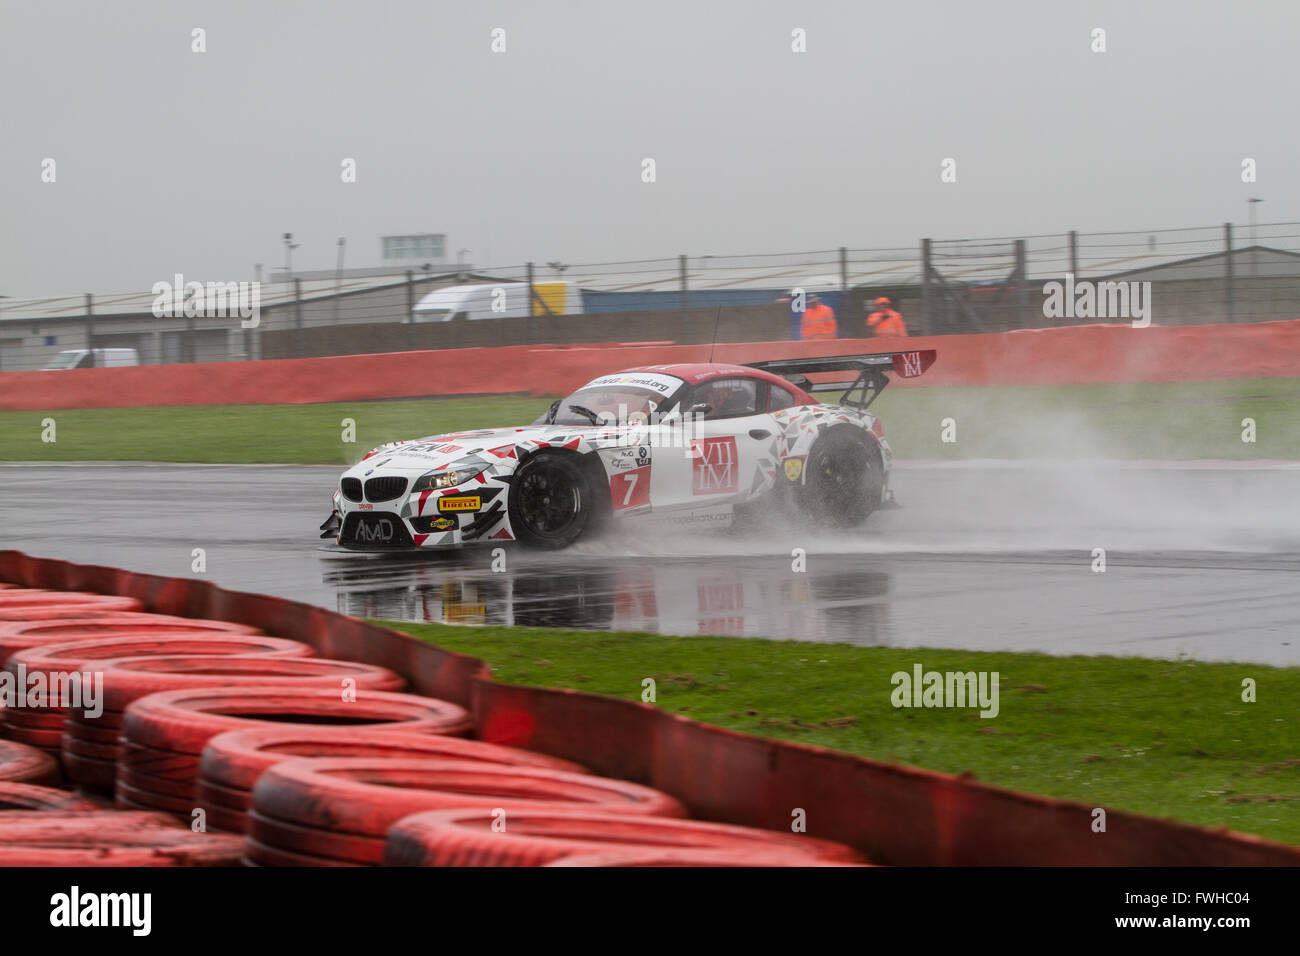 Silverstone, UK. 12th June, 2016. The #7 AMDtuning.com BMW Z4 GT3 of Lee Mowle/Joe Osborne losing control heading onto the Hanger straight Credit:  steven roe/Alamy Live News Stock Photo